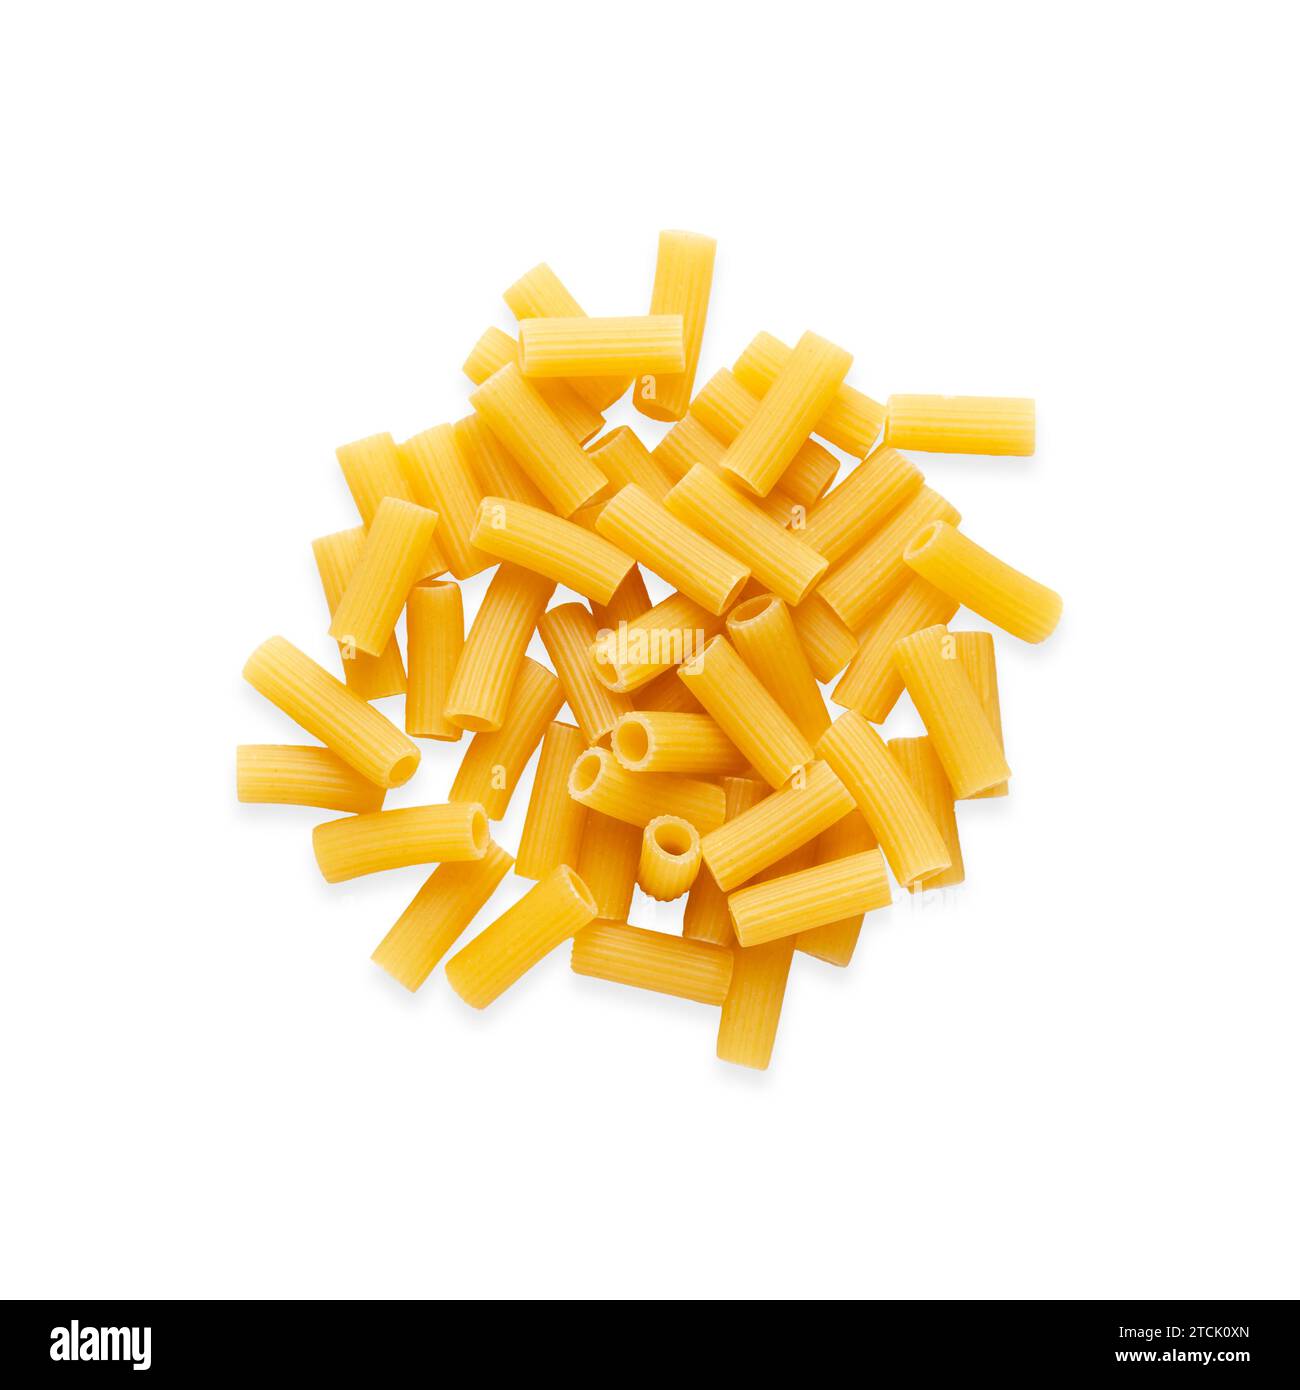 A heap of rigatoni pasta on white background. Square format. Top view. Stock Photo